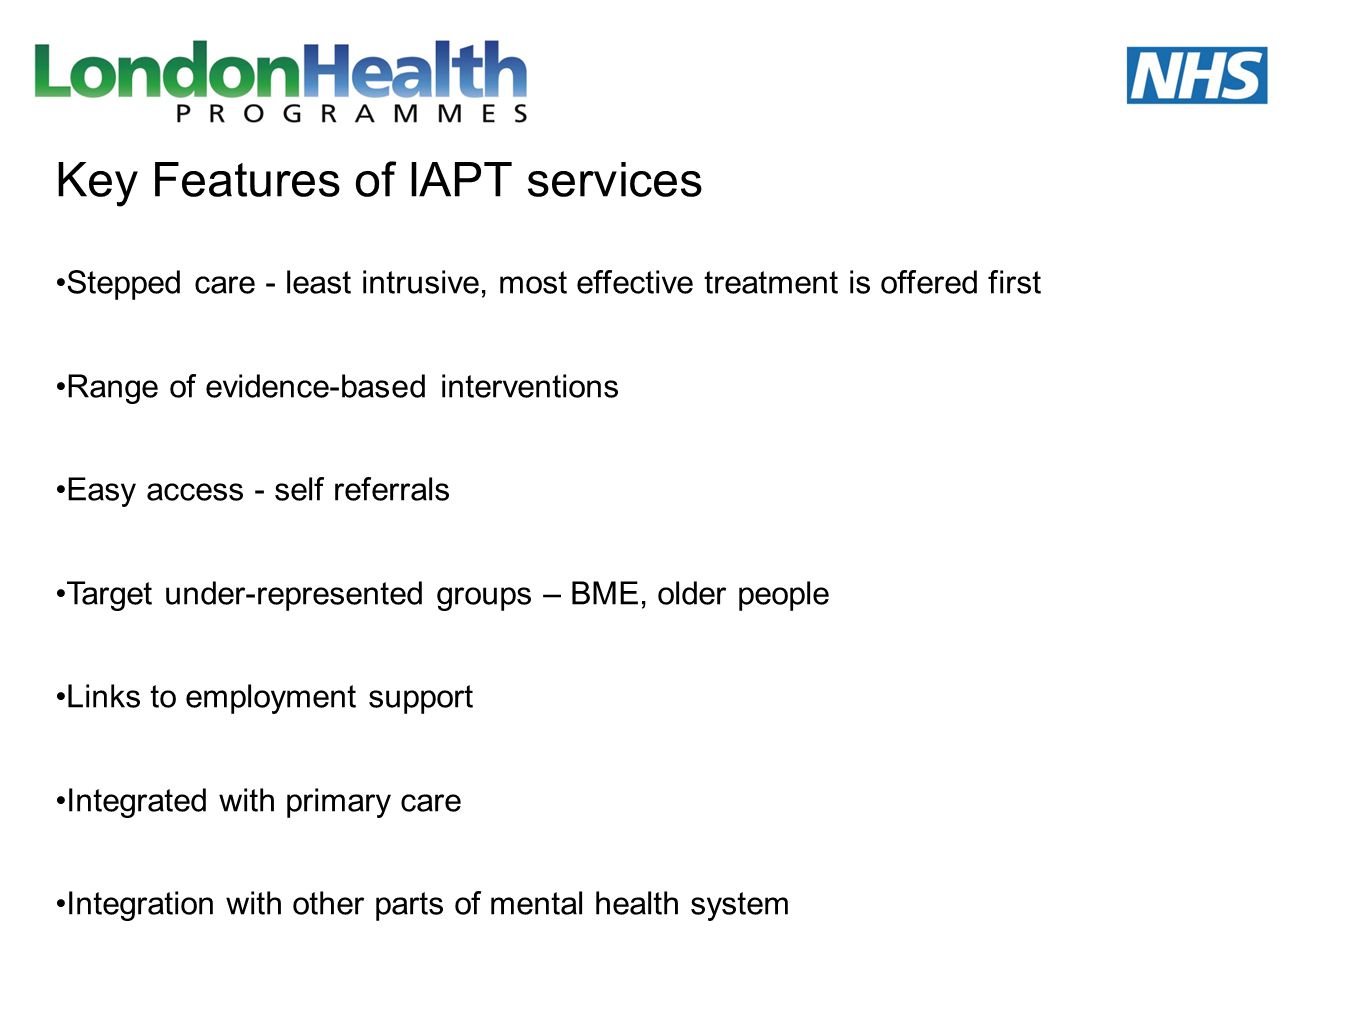 Key Features of IAPT services